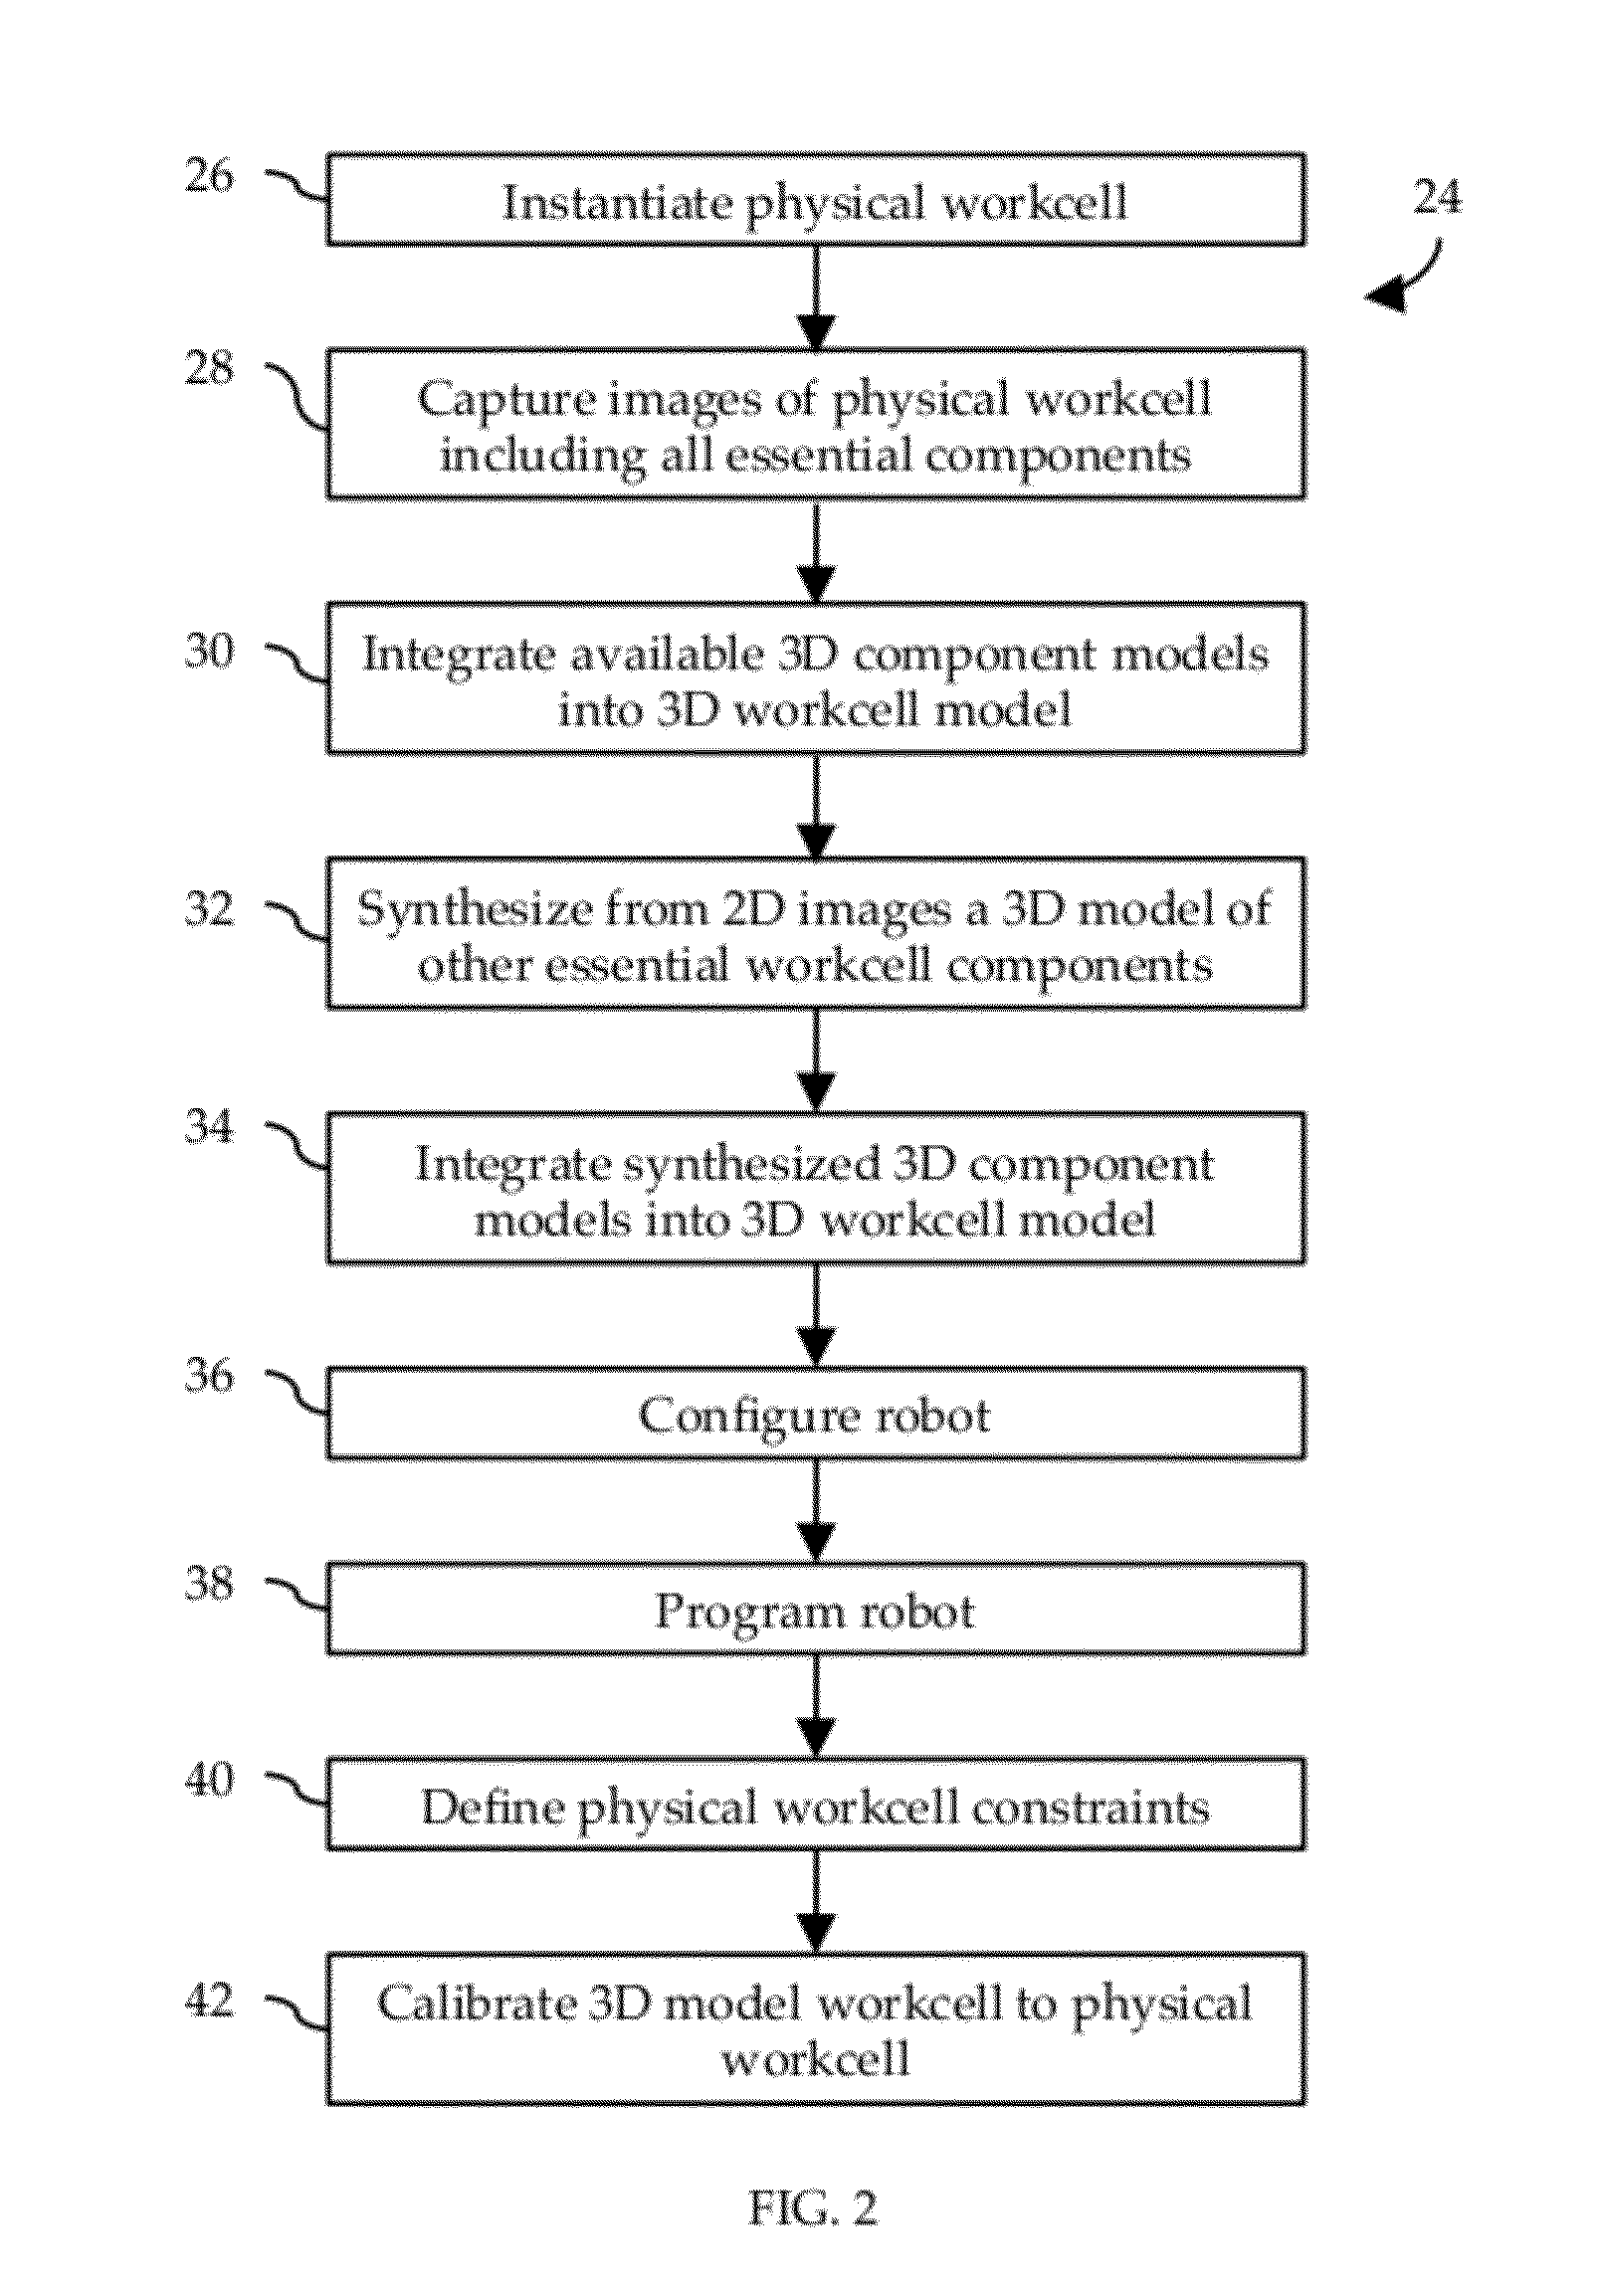 Method to Model and Program a Robotic Workcell